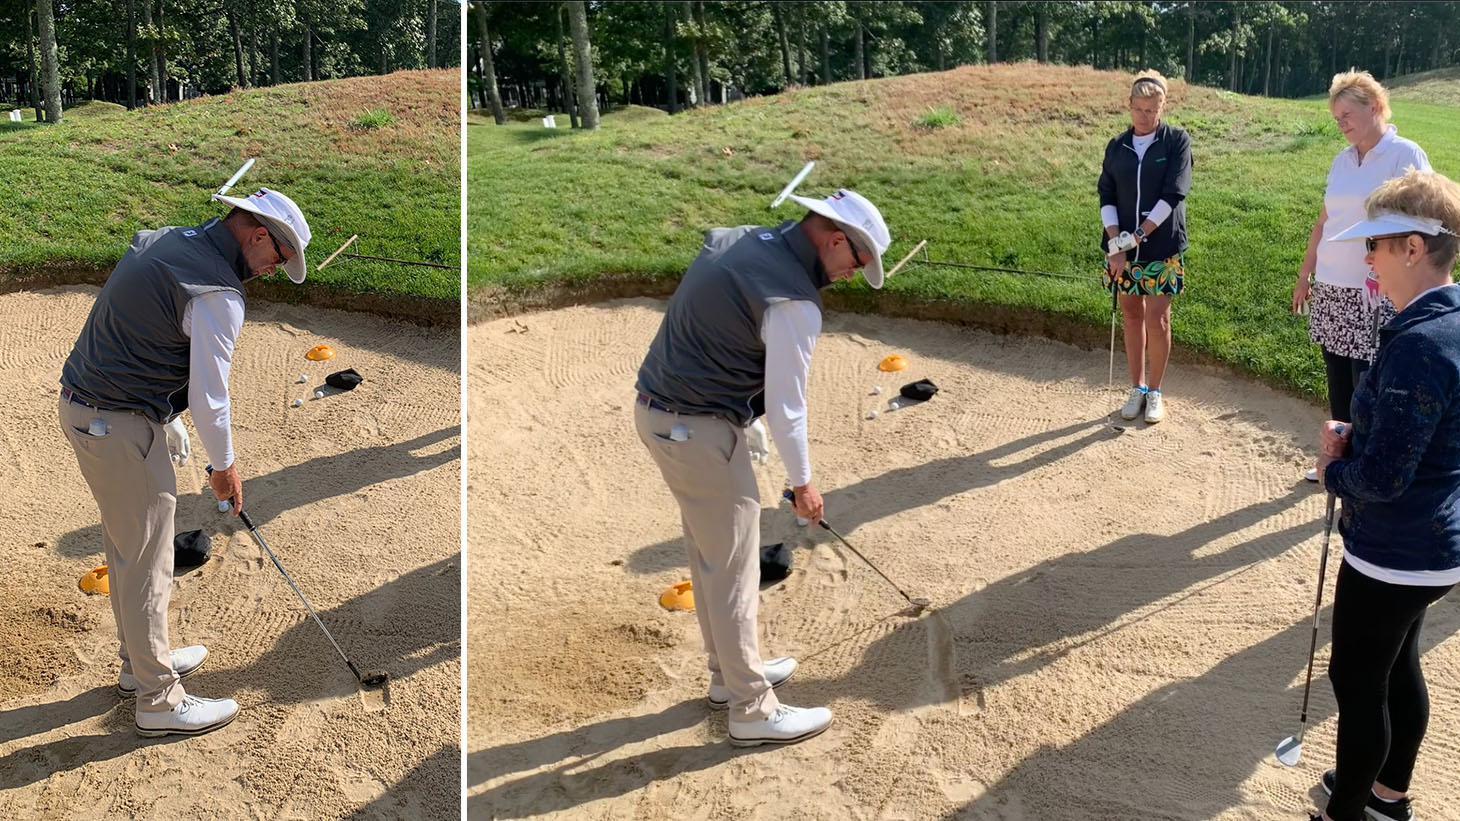 The first fundamental in bunker play is...